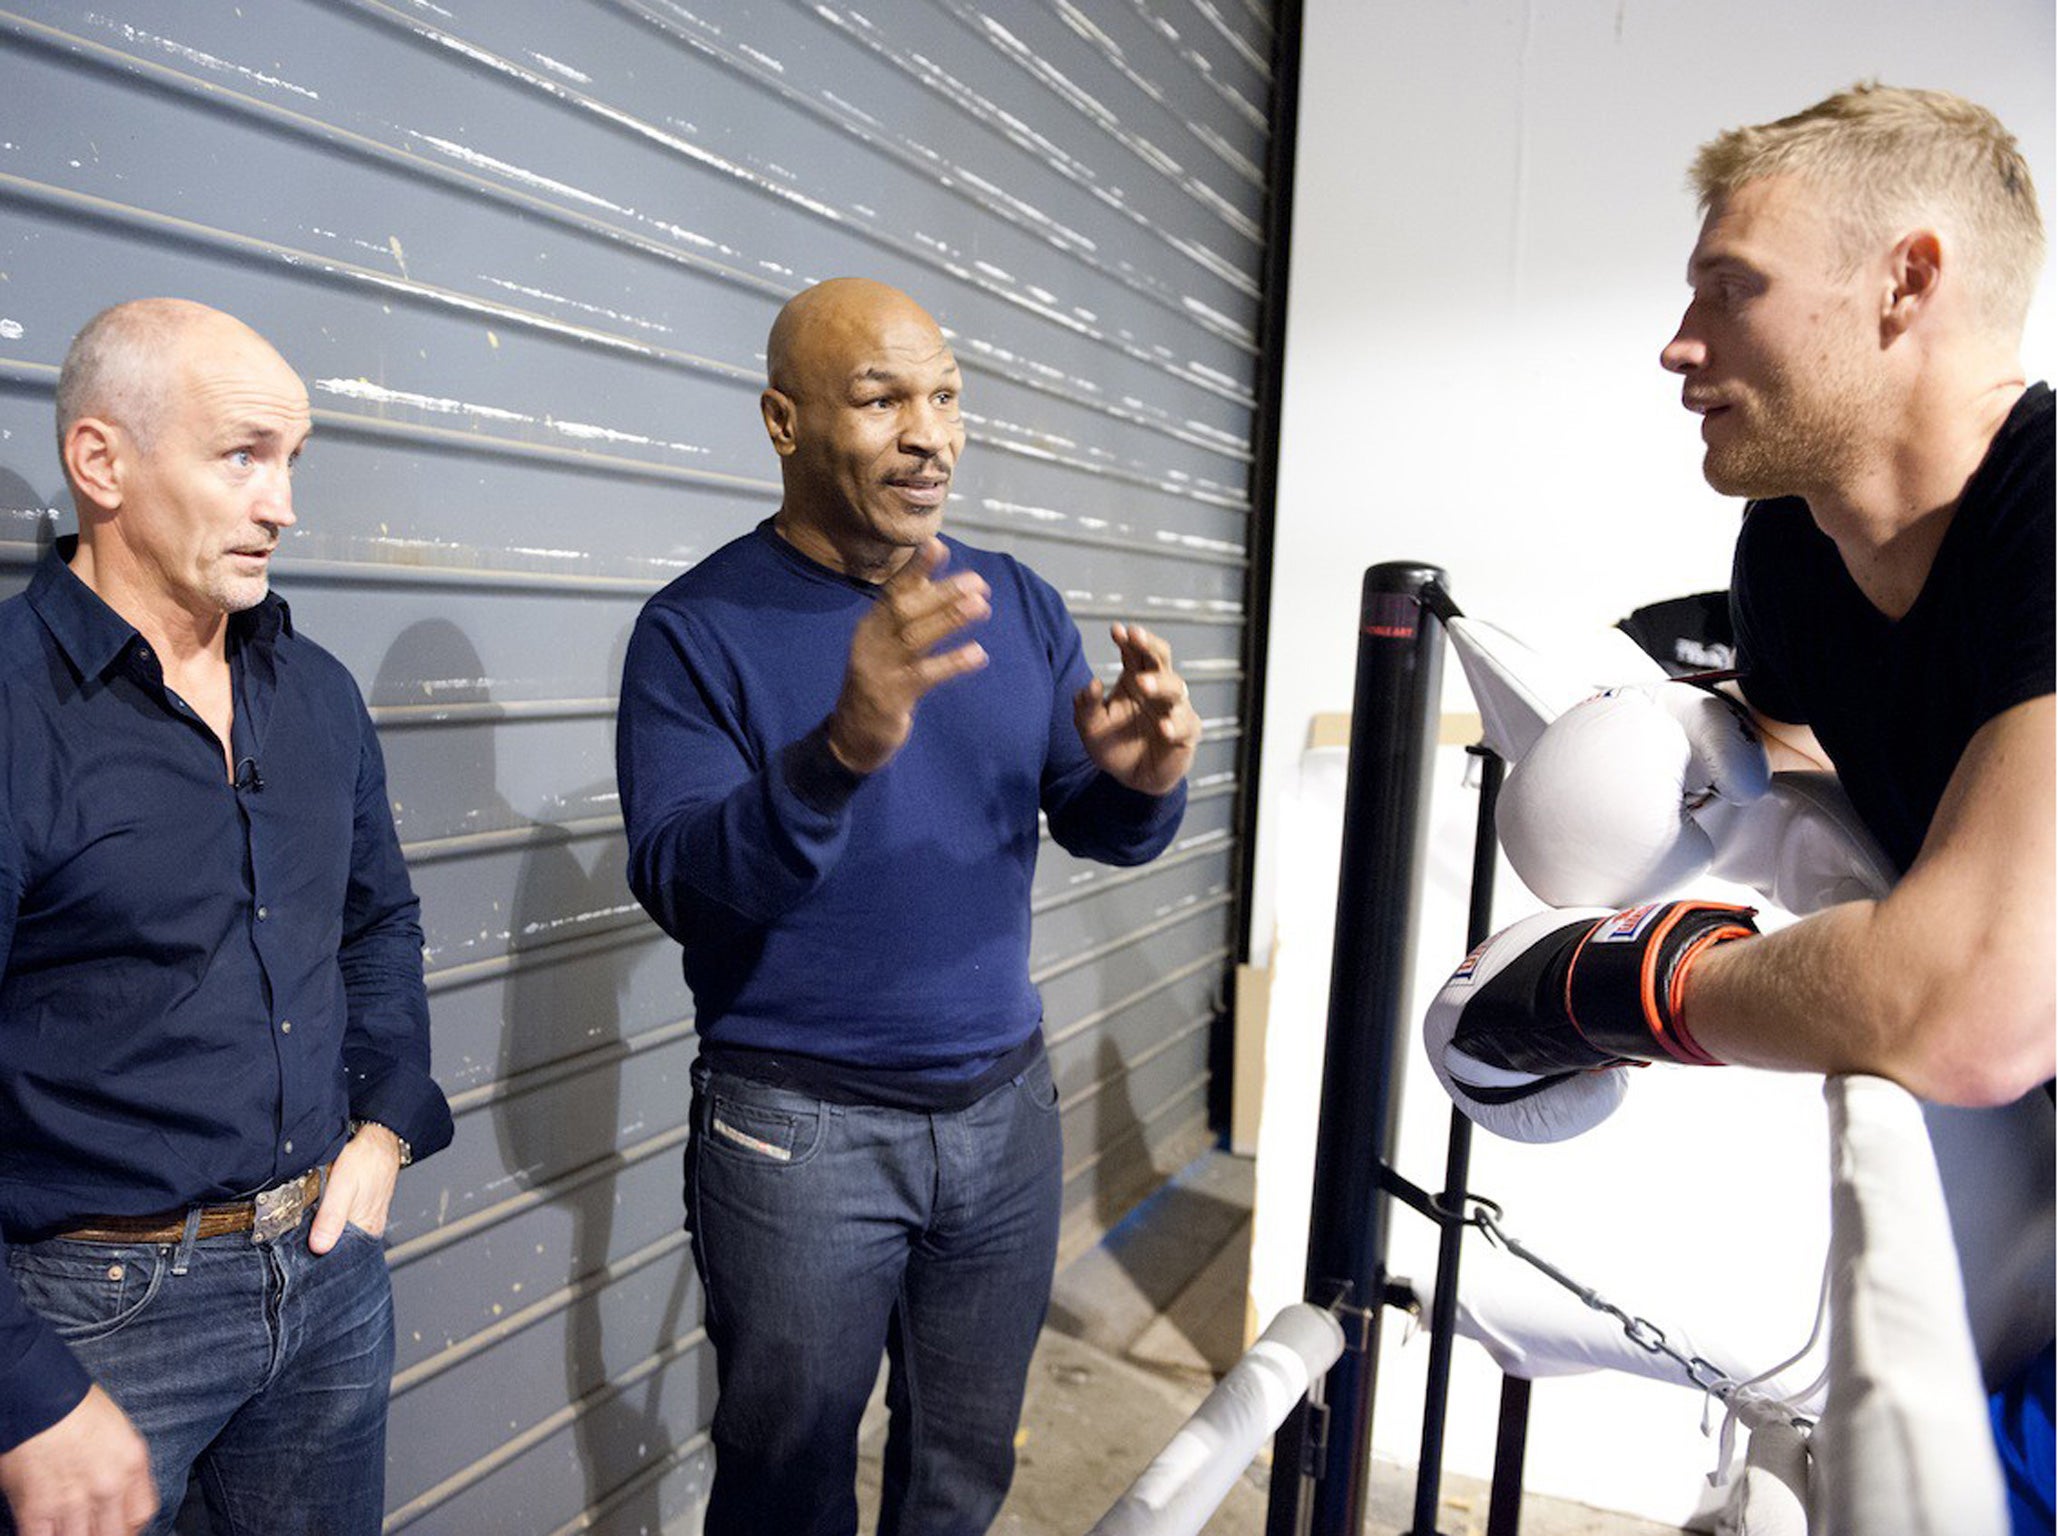 Ring the changes: Andrew Flintoff and his trainer Barry McGuigan (far left) receive some advice from Mike Tyson